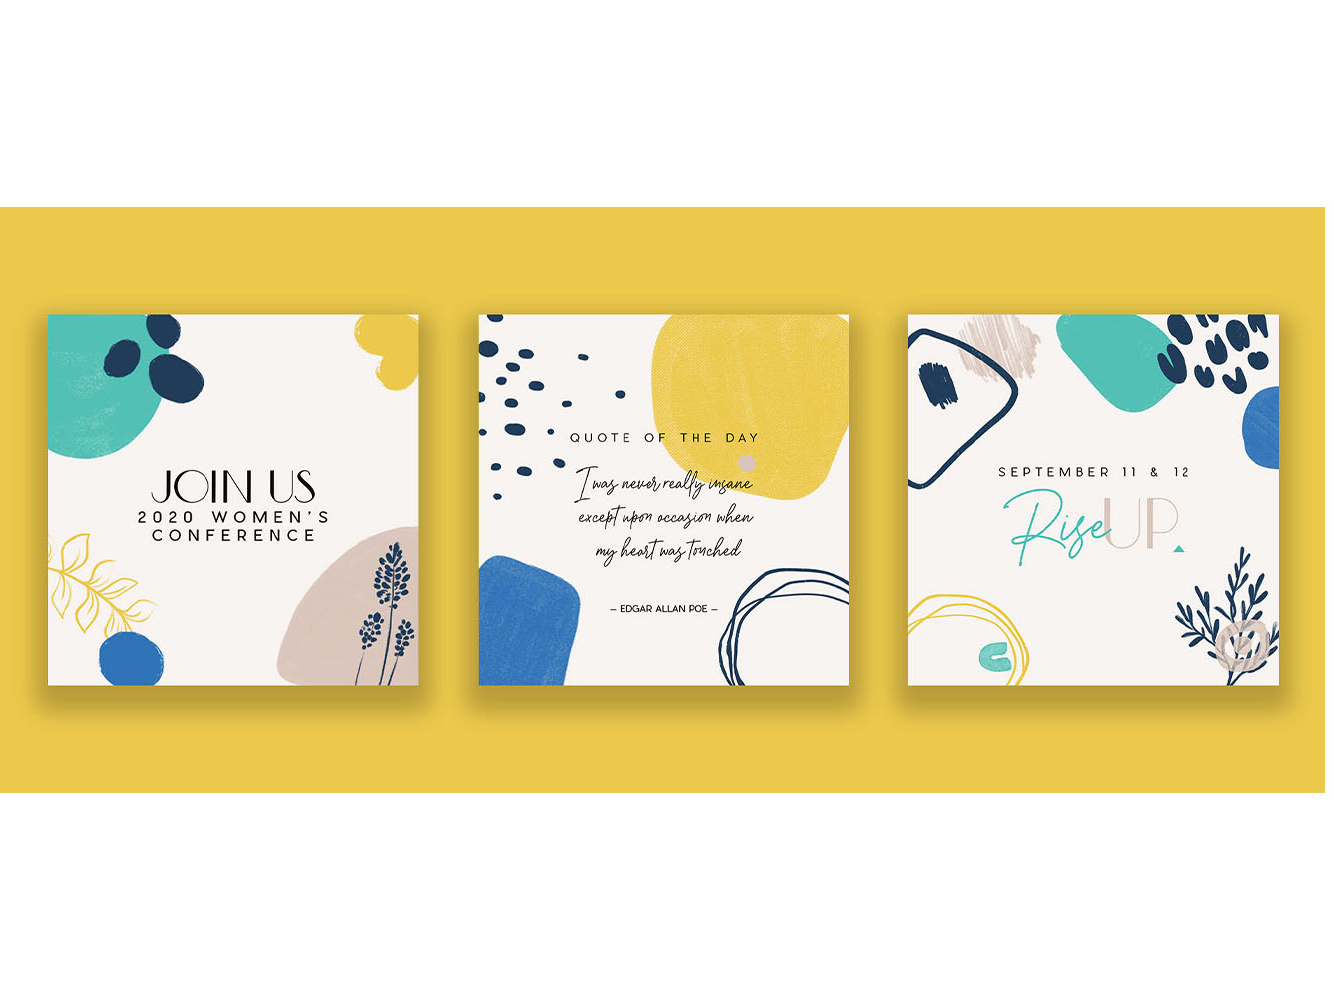 Rise Up Womens Conference Social Media by Sydney Strnad on Dribbble